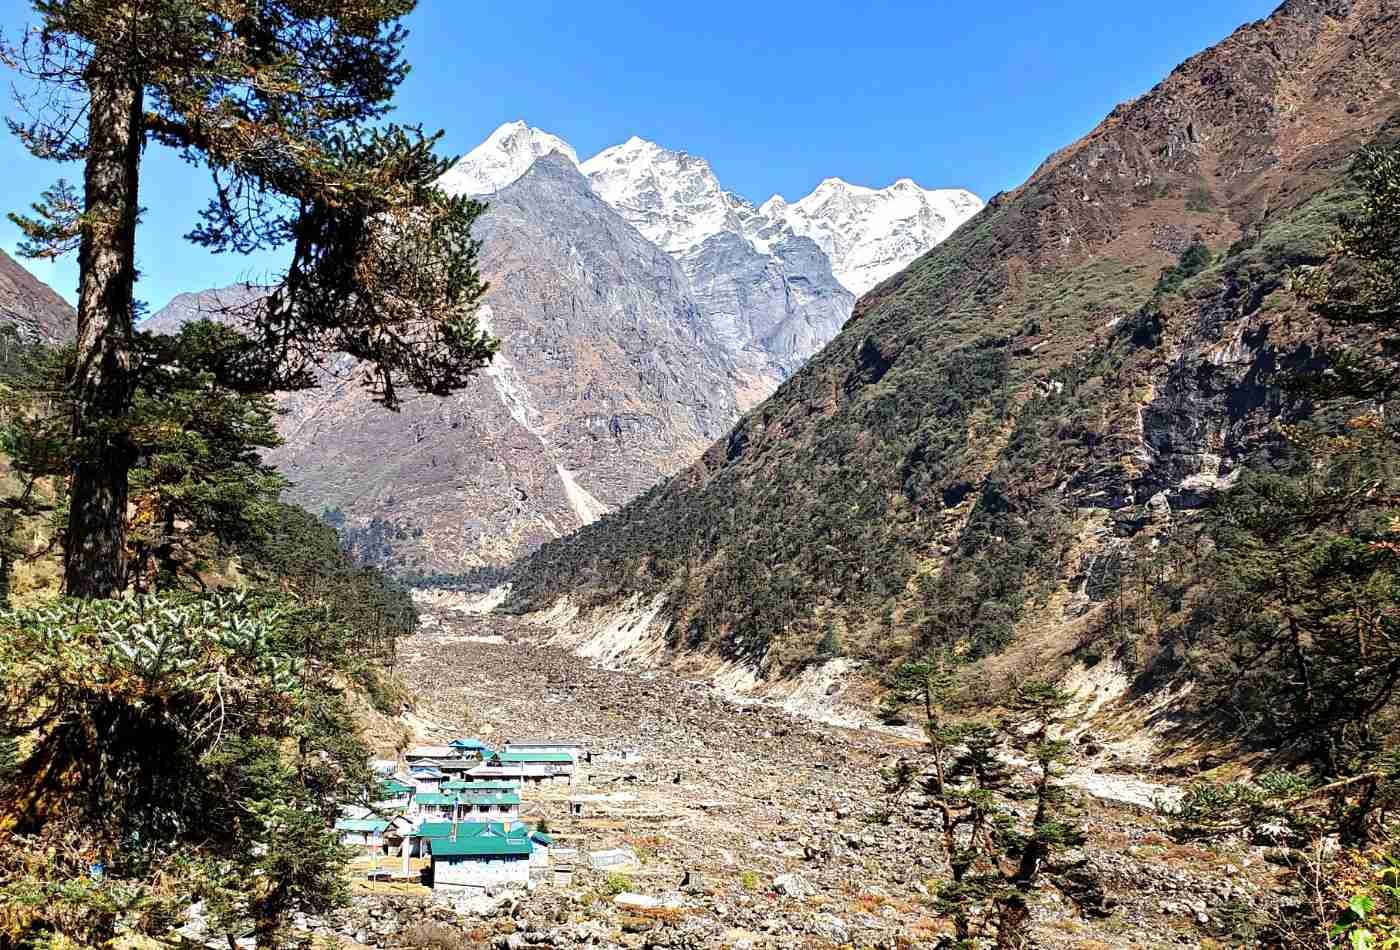 A picturesque view of Kothe village, featuring traditional green-roofed houses nestled among the trees, with the majestic Mera Peak looming in the background.